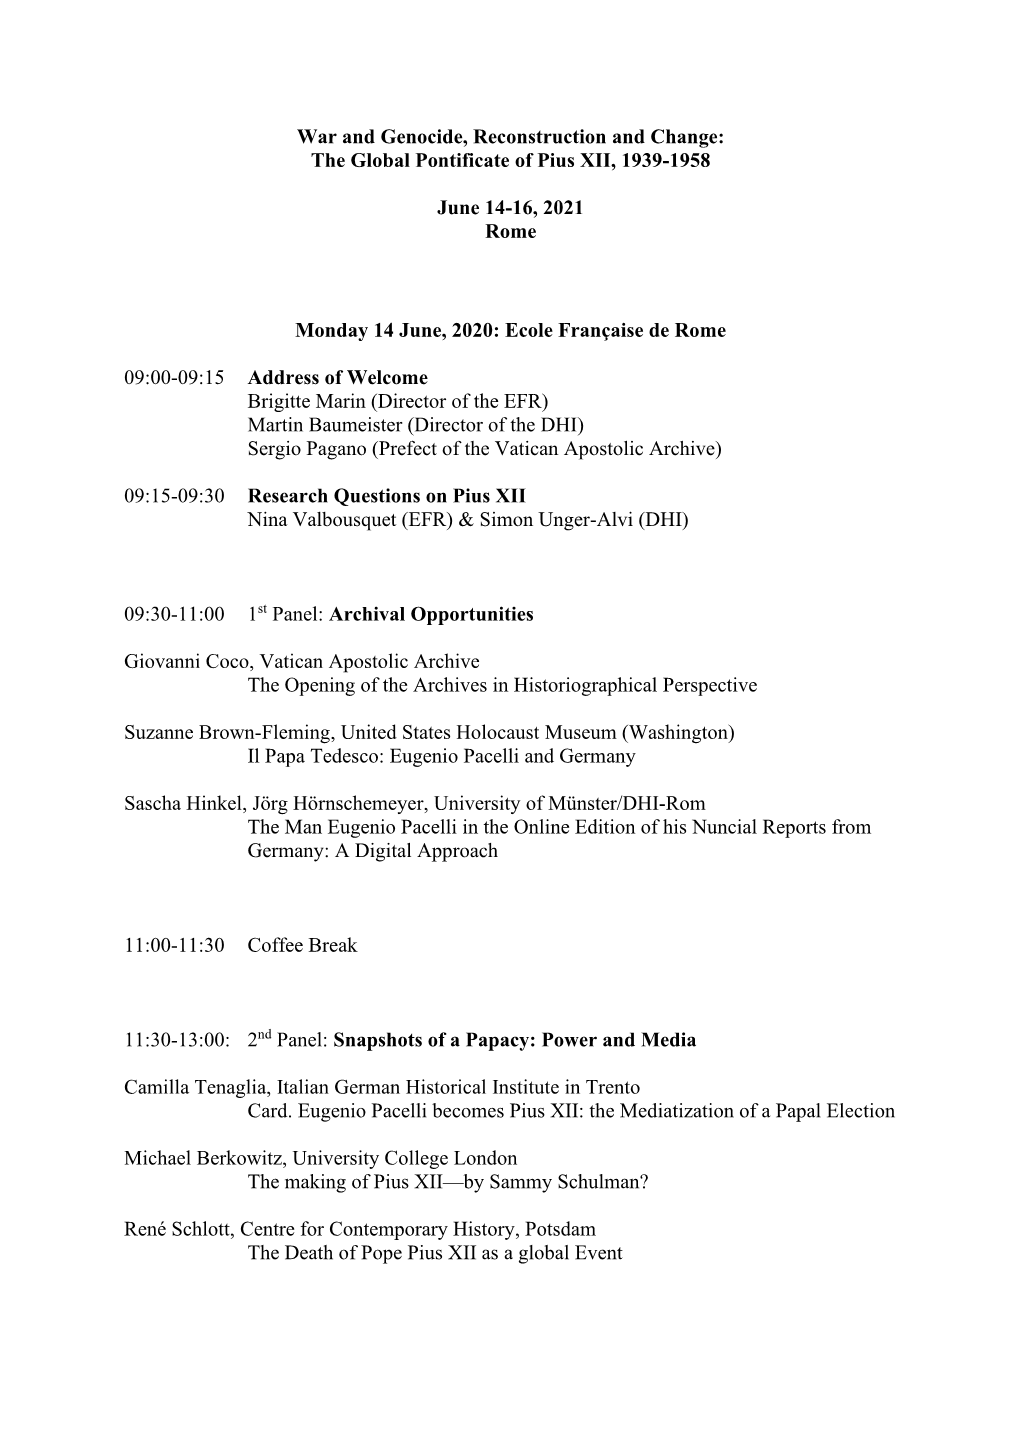 War and Genocide, Reconstruction and Change: the Global Pontificate of Pius XII, 1939-1958 June 14-16, 2021 Rome Monday 14 June